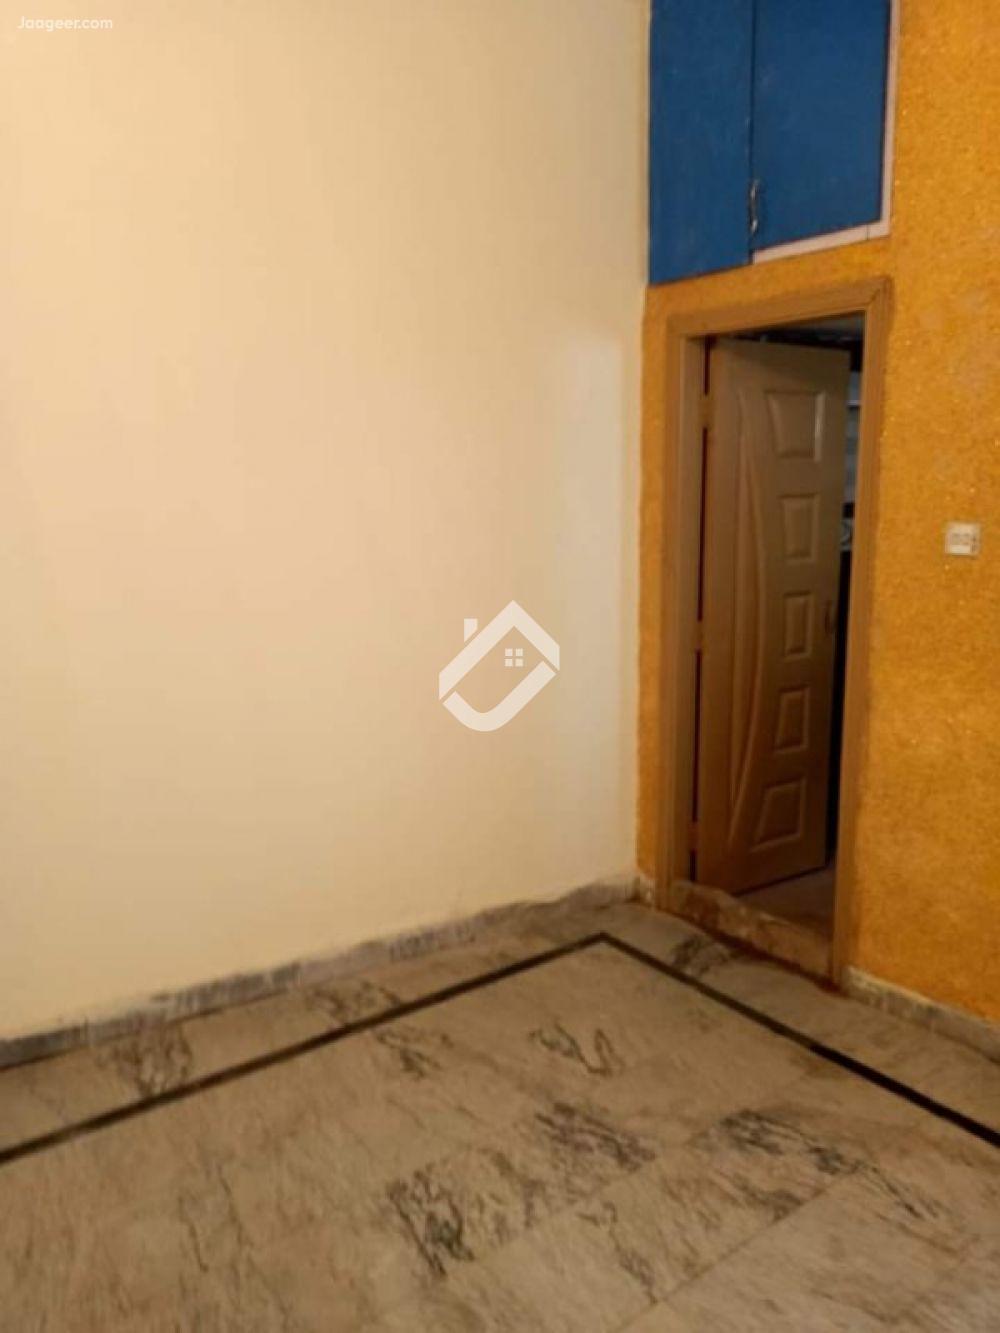 View  2.25 Marla House For Sale In Barma Town  in Barma Town, Islamabad